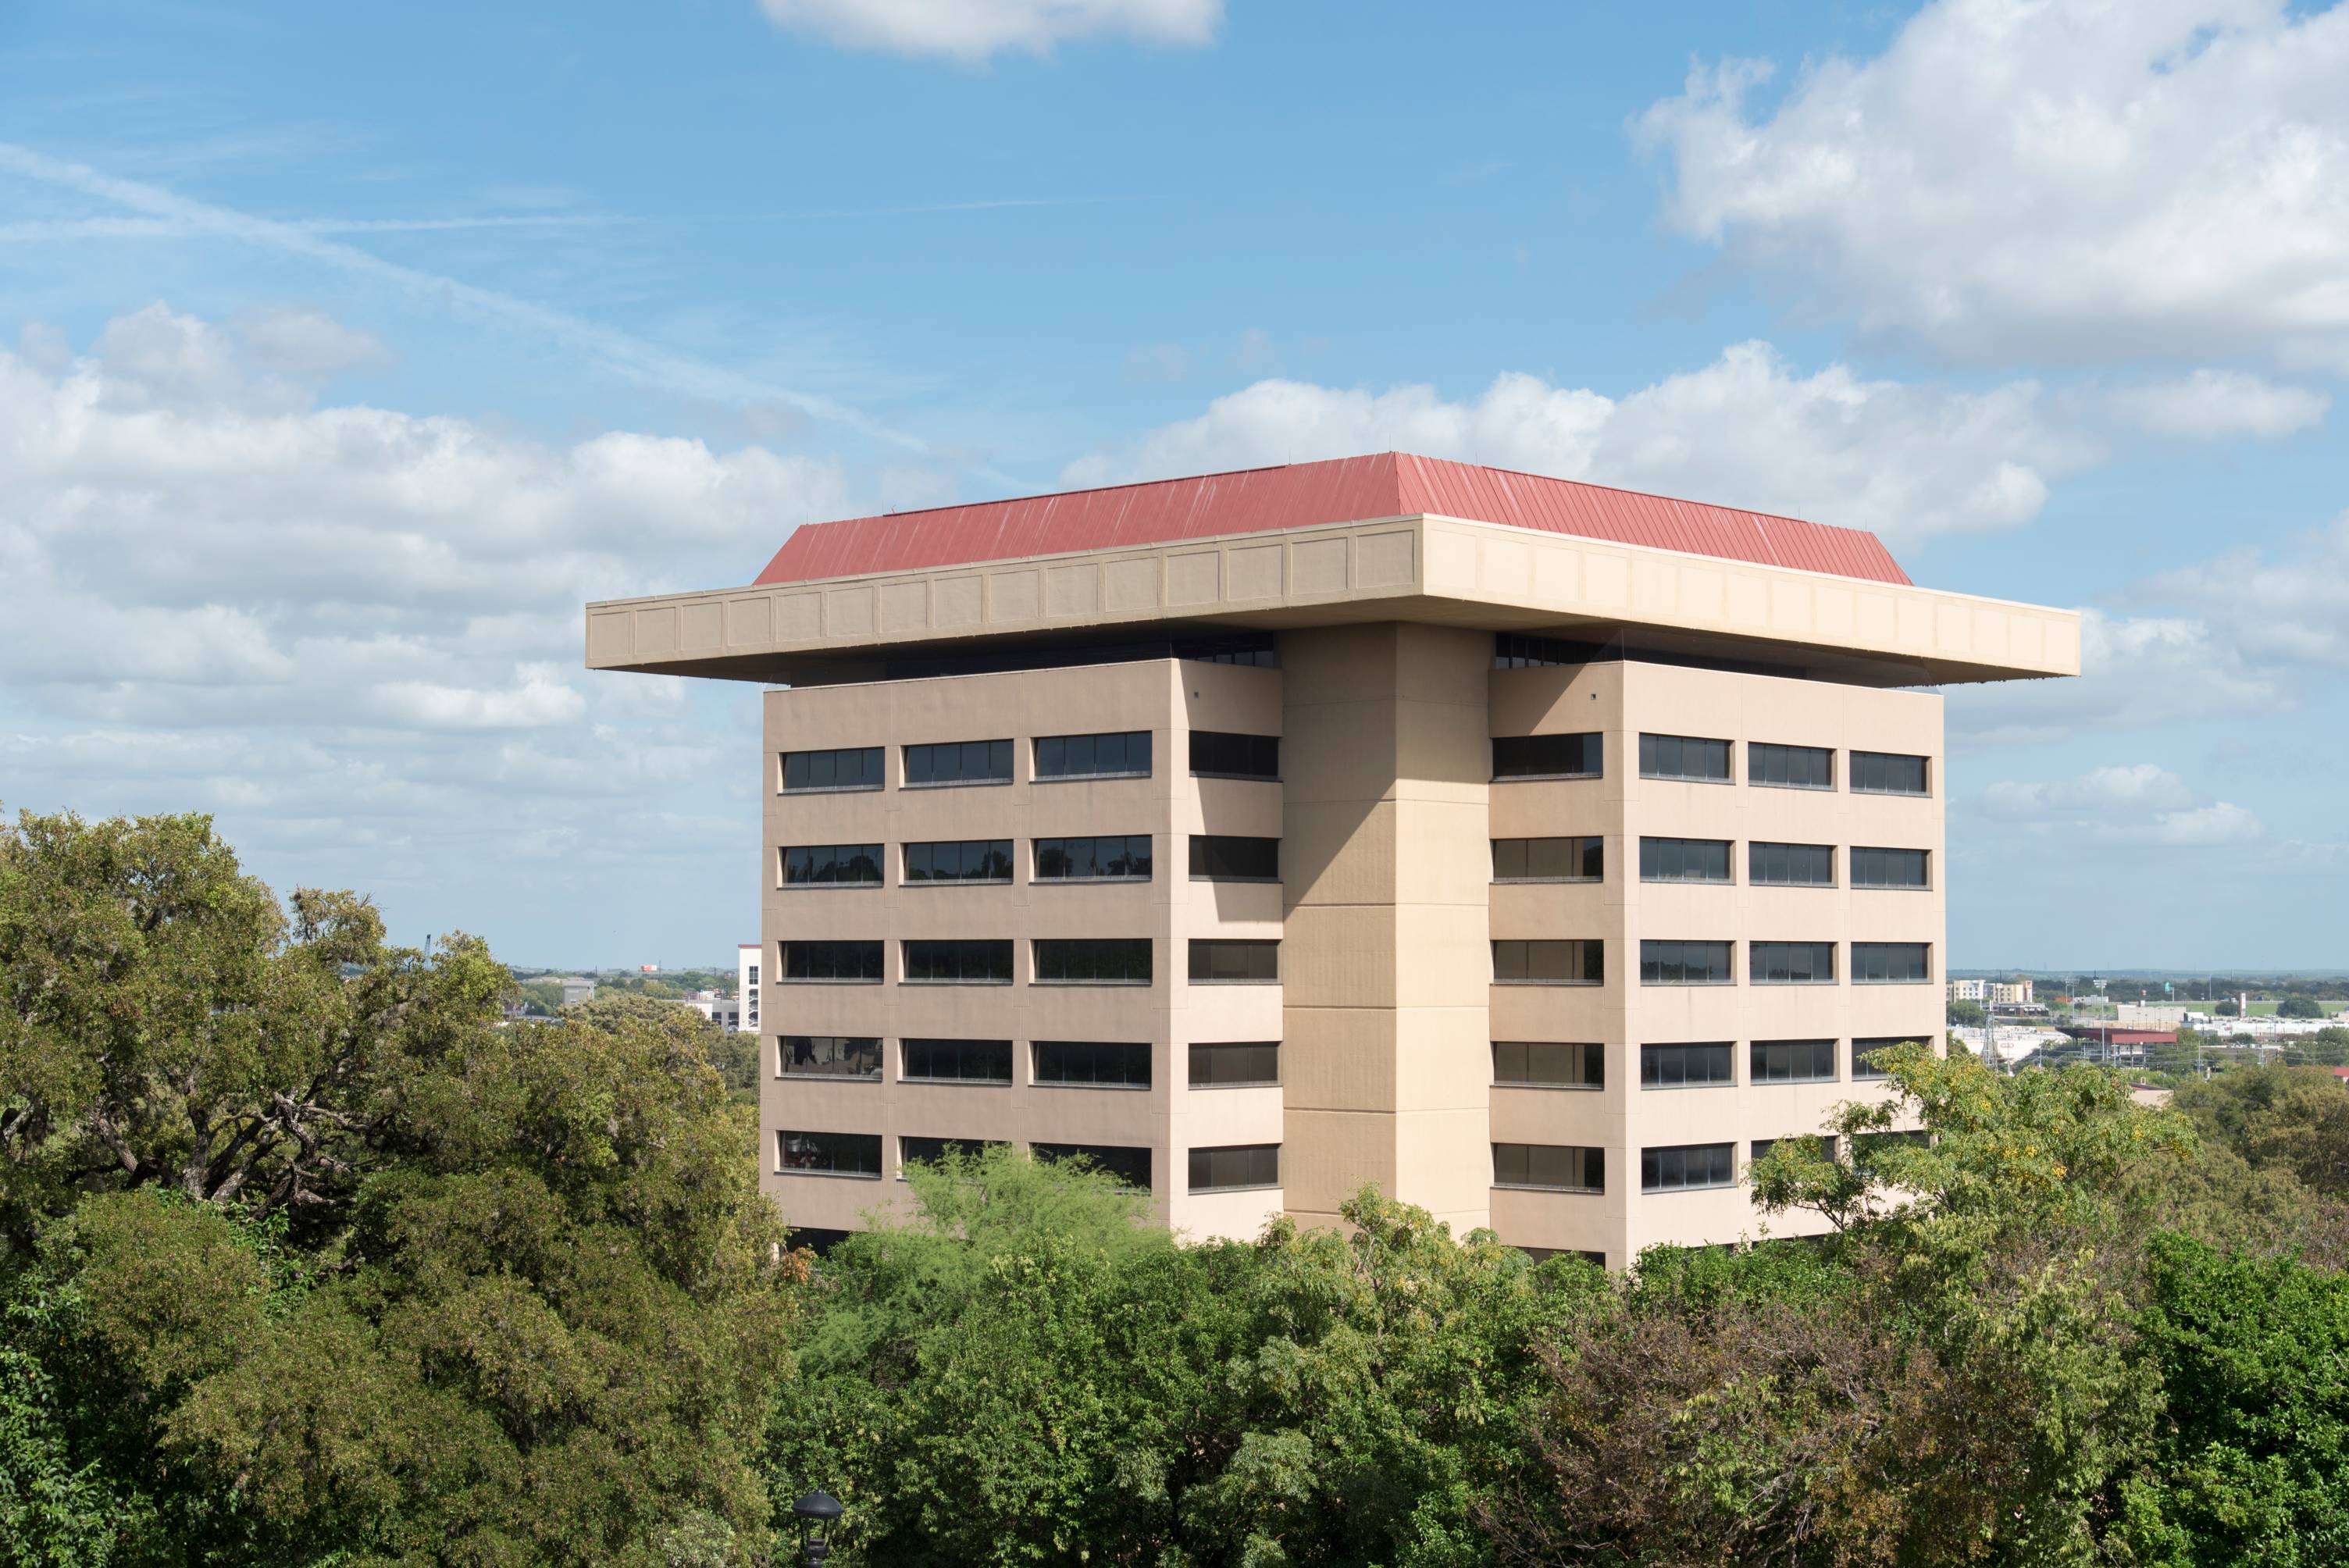 Aerial view of J. C. Kellam Administrative Building and surrounding trees in front of a bright blue sky